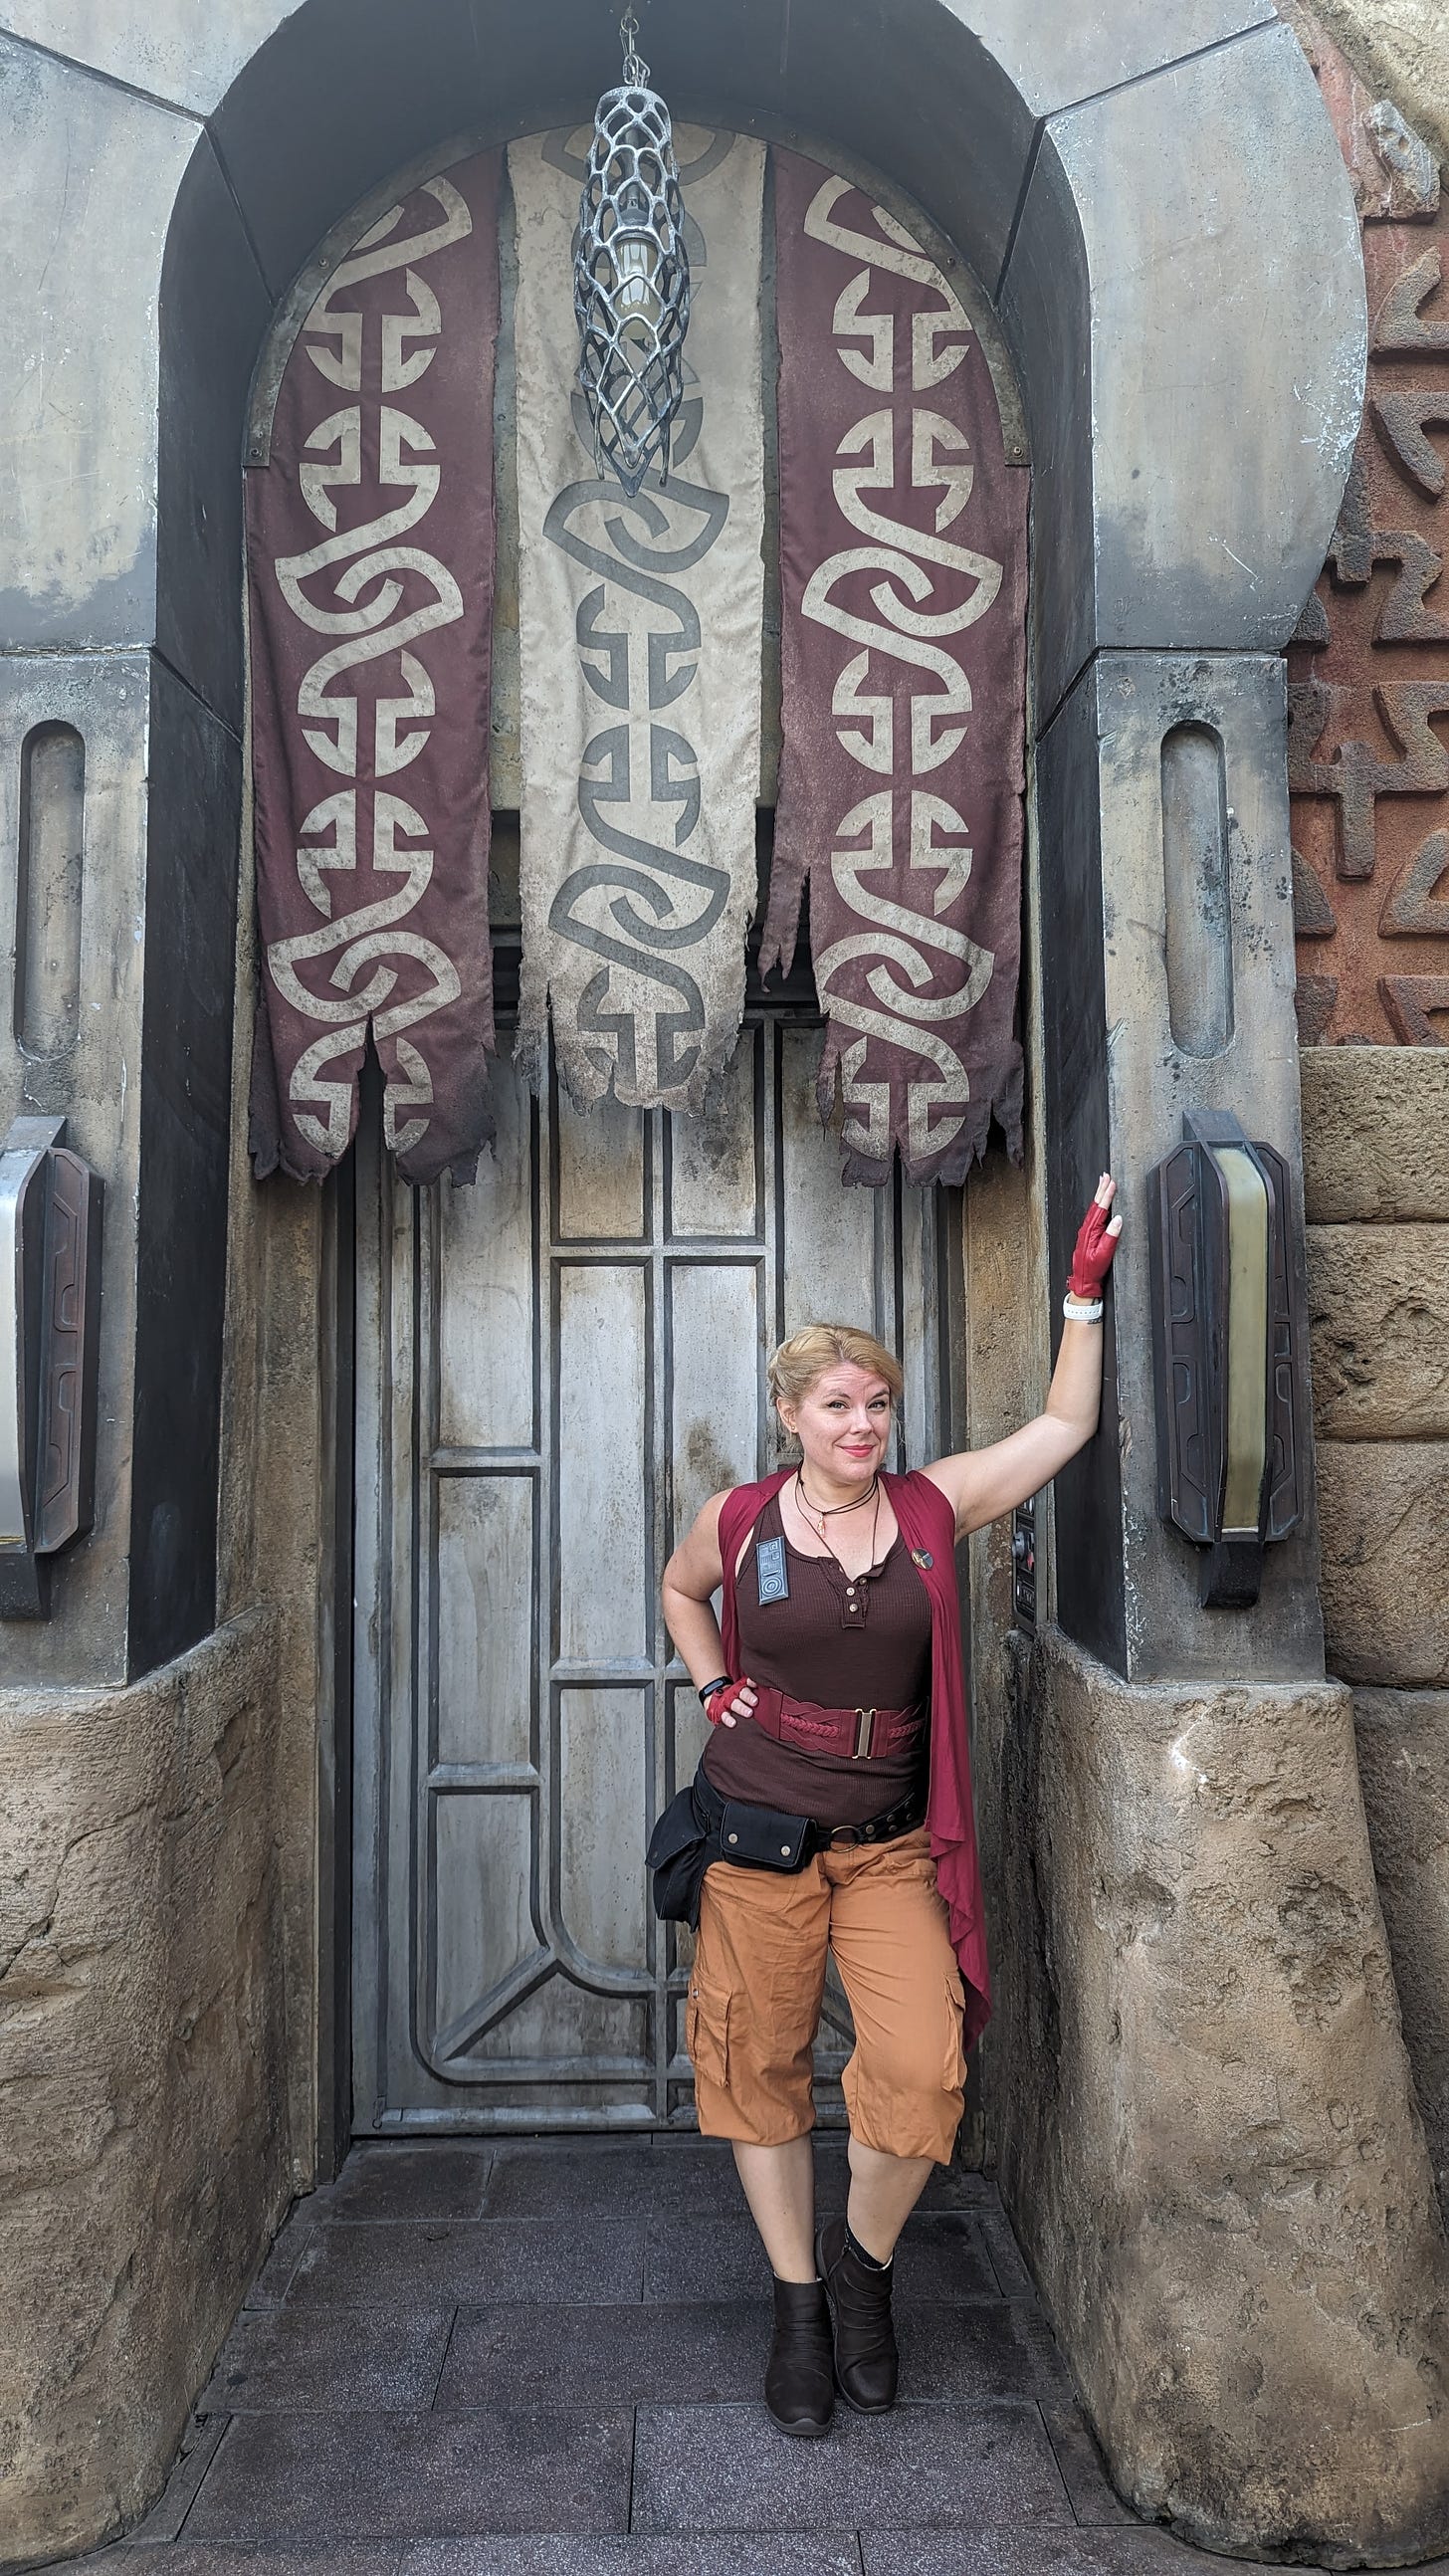 Cass, dressed in brown-orange cargo pants, a brown tank top, a red sleeveless wrap, and red gloves, standing in front of a decorative archway in Black Spire Outpost